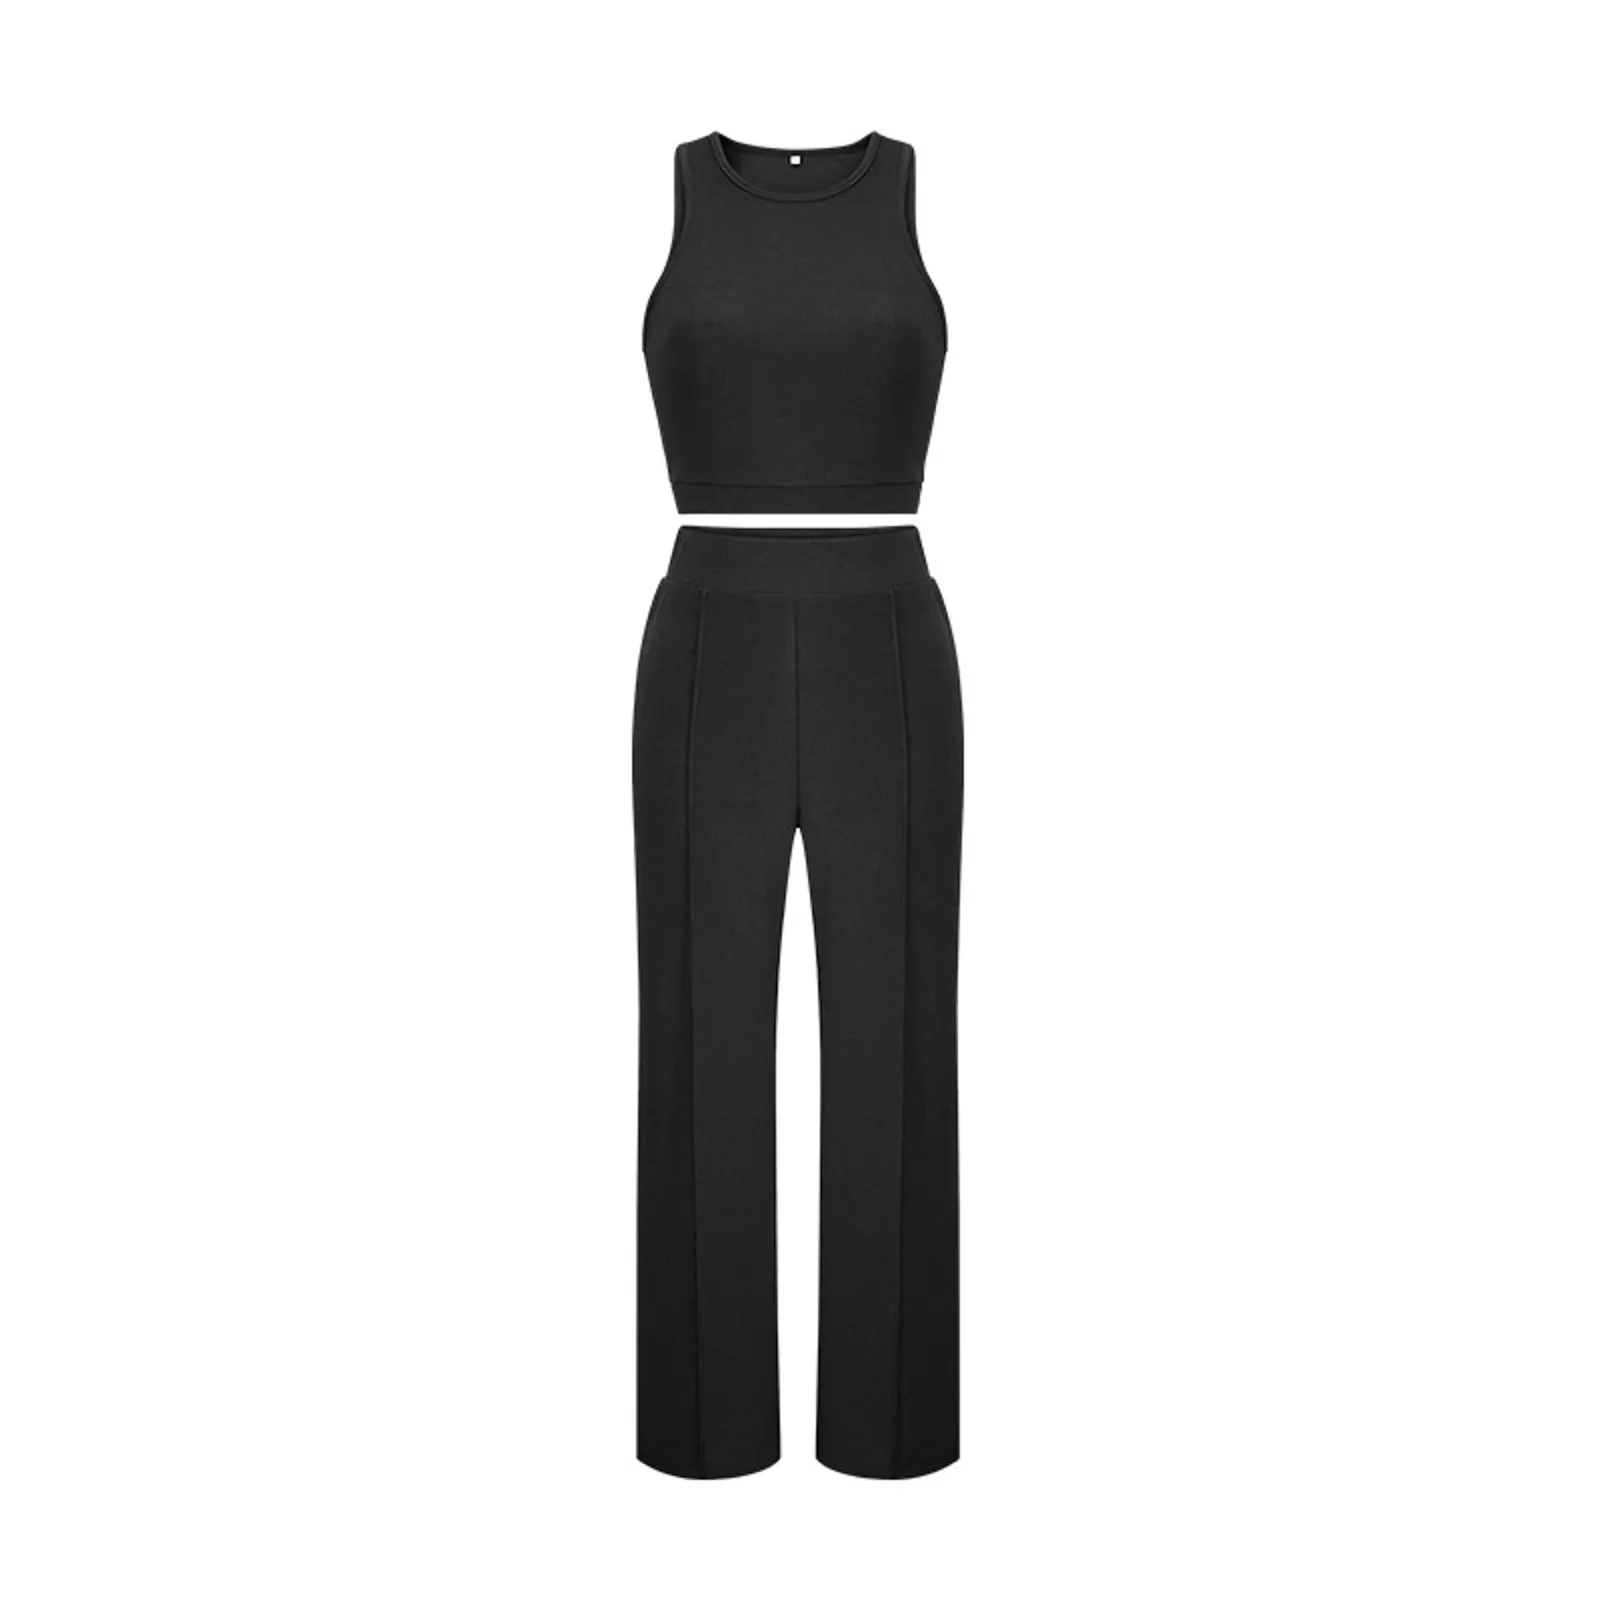 Women's Summer 2 Piece Outfits Round Neck Crop Basic Top Cropped Wide Leg Pants Set Fashion Solid Elegant Pant Suits For Women 4